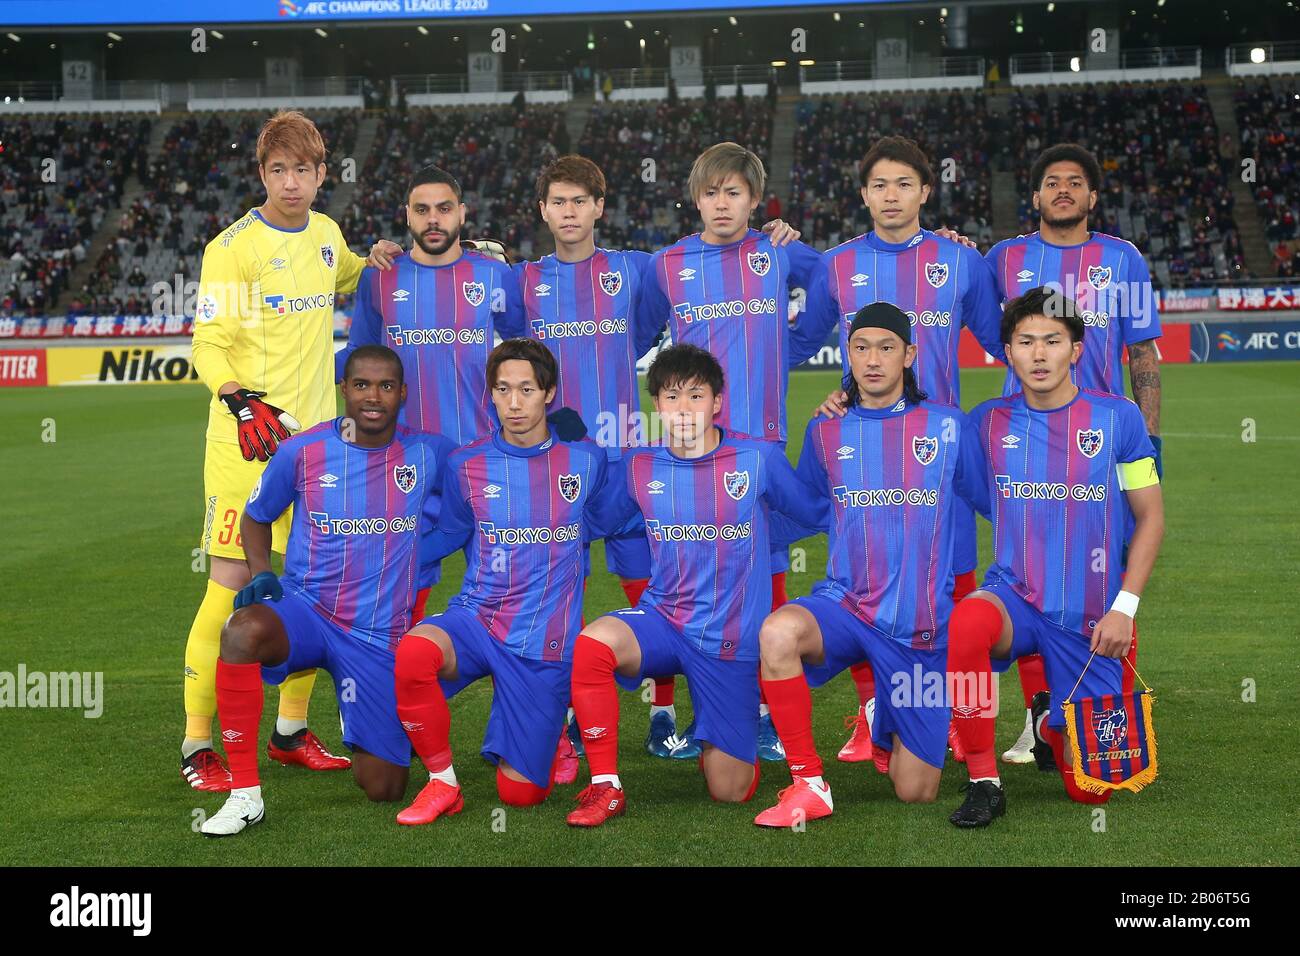 Fc Tokyo Team Group Line Up Pose Before The Afc Champions League Group F Match Between Fc Tokyo 1 0 Perth Glory Fc At Tokyo Stadium In Tokyo Japan On February 18